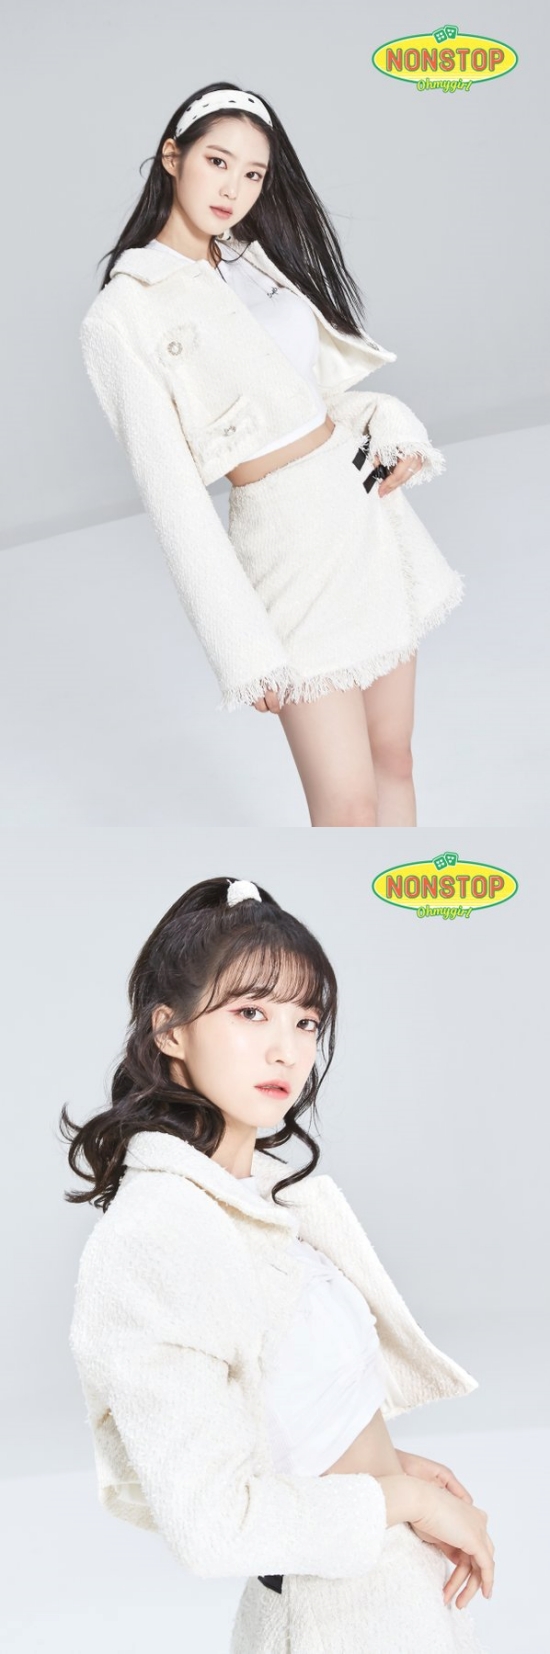 Dancer version of NONSTOP OH MY GIRL attracts attention.On the 22nd, OH MY GIRL told the official sns of the team, OH MY GIRL 7TH MINI ALBUM [NONSTOP] Friend Zone arrival Dance Player ver.Group teaser and posted a picture.SNS contains the dance player version of OH MY GIRL members.OH MY GIRL in Teaser attracted the attention of the official fan club Miracle, showing off its unique beauty and eye-catching aura.On the other hand, WM Entertainment, a midnight agency, posted a song teaser image of the title song Nonstop of the mini 7th album NONSTOP through the official SNS channel of OH MY GIRL.The lyrics of the released title song Nonstop are impressive in the lyrics that compare the dizzying feelings of the moment when you realize the excitement of your friend, such as I fell on an uninhabited island one day, I think you would be if you were alone, I frowned at thinking, but I can not tell you and Especially, the phrase Slowly stand up continues to appear, and it is raising expectations by foreshadowing addictive melody.OH MY GIRLs mini-7th album NONSTOP title song Nonstop is an uptempo dance song that blends rhythmic bass and energistic synth sound with OH MY GIRLs unique vocals.OH MY GIRLs mini-7 album NONSTOP will be available on various music sites at 6 pm on April 27th.